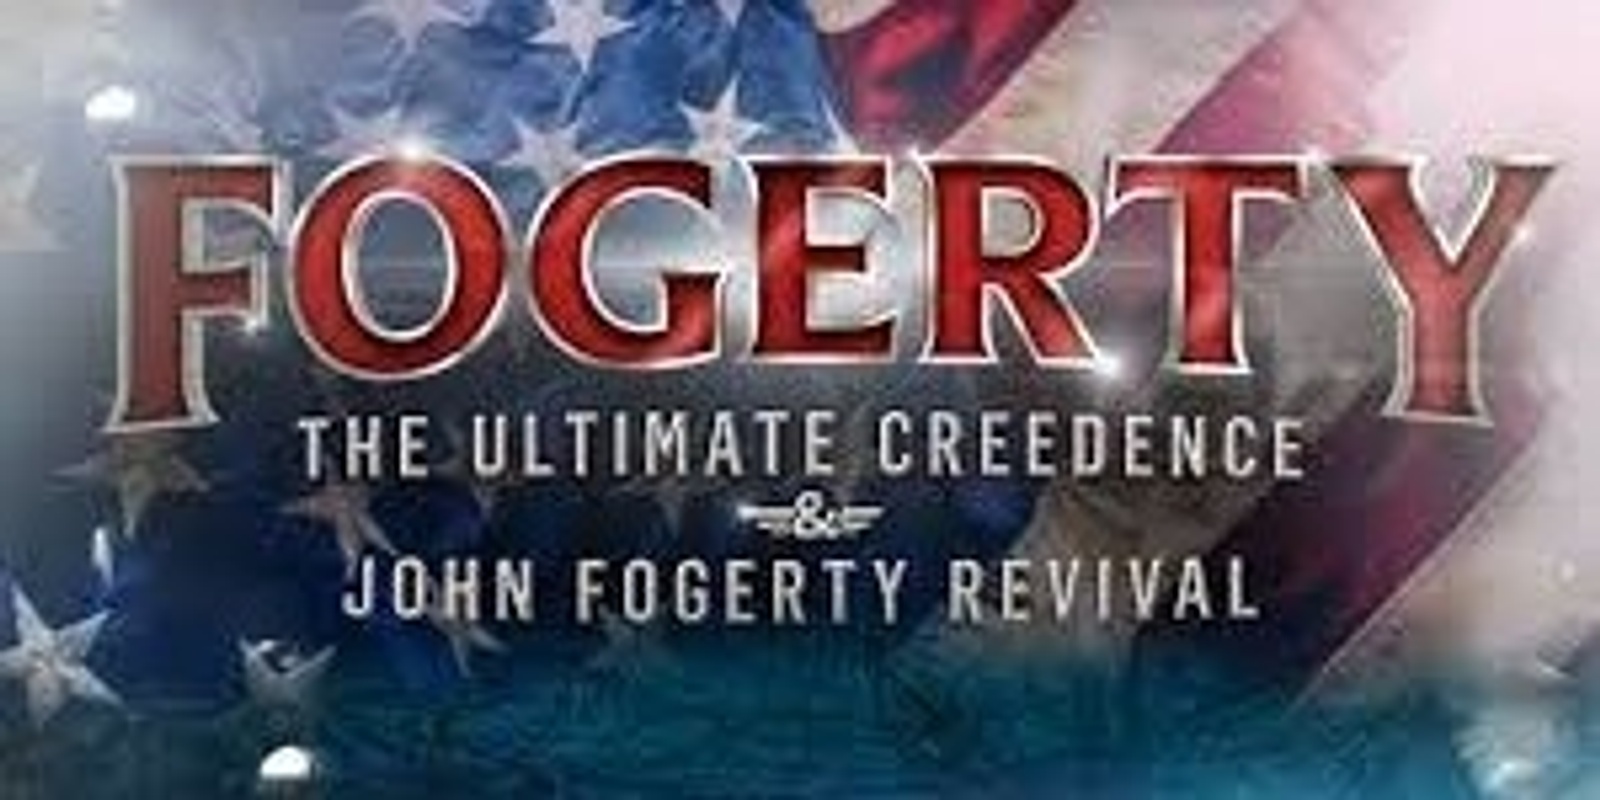 Banner image for FOGGERTY